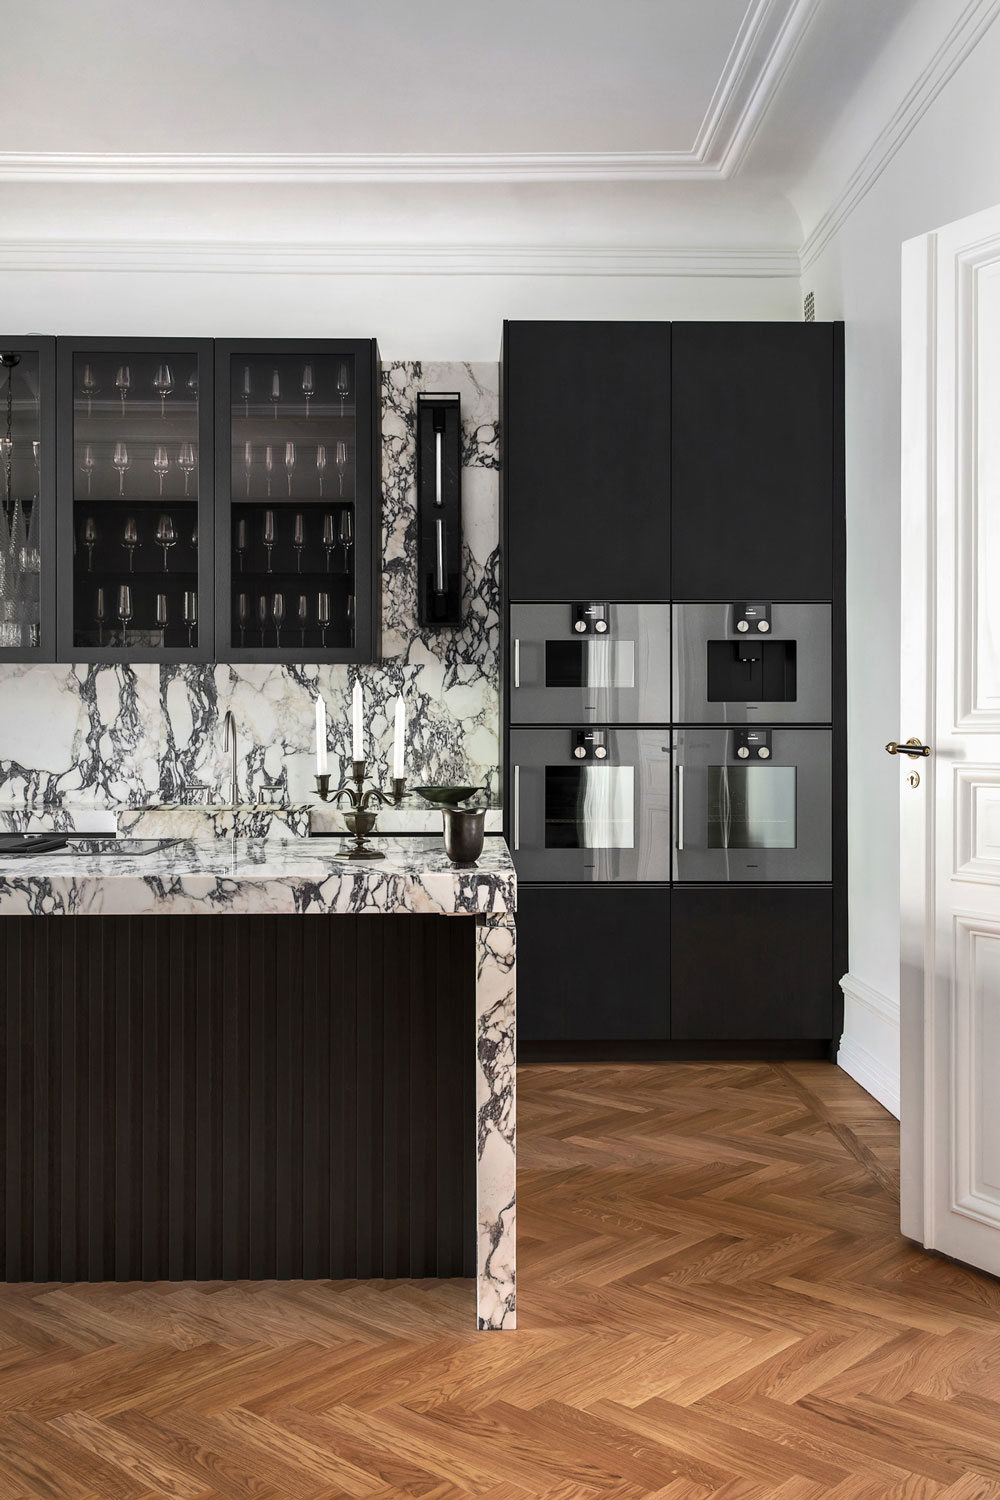 MAGNIFICENT MARBLE KITCHEN - Buster + Punch